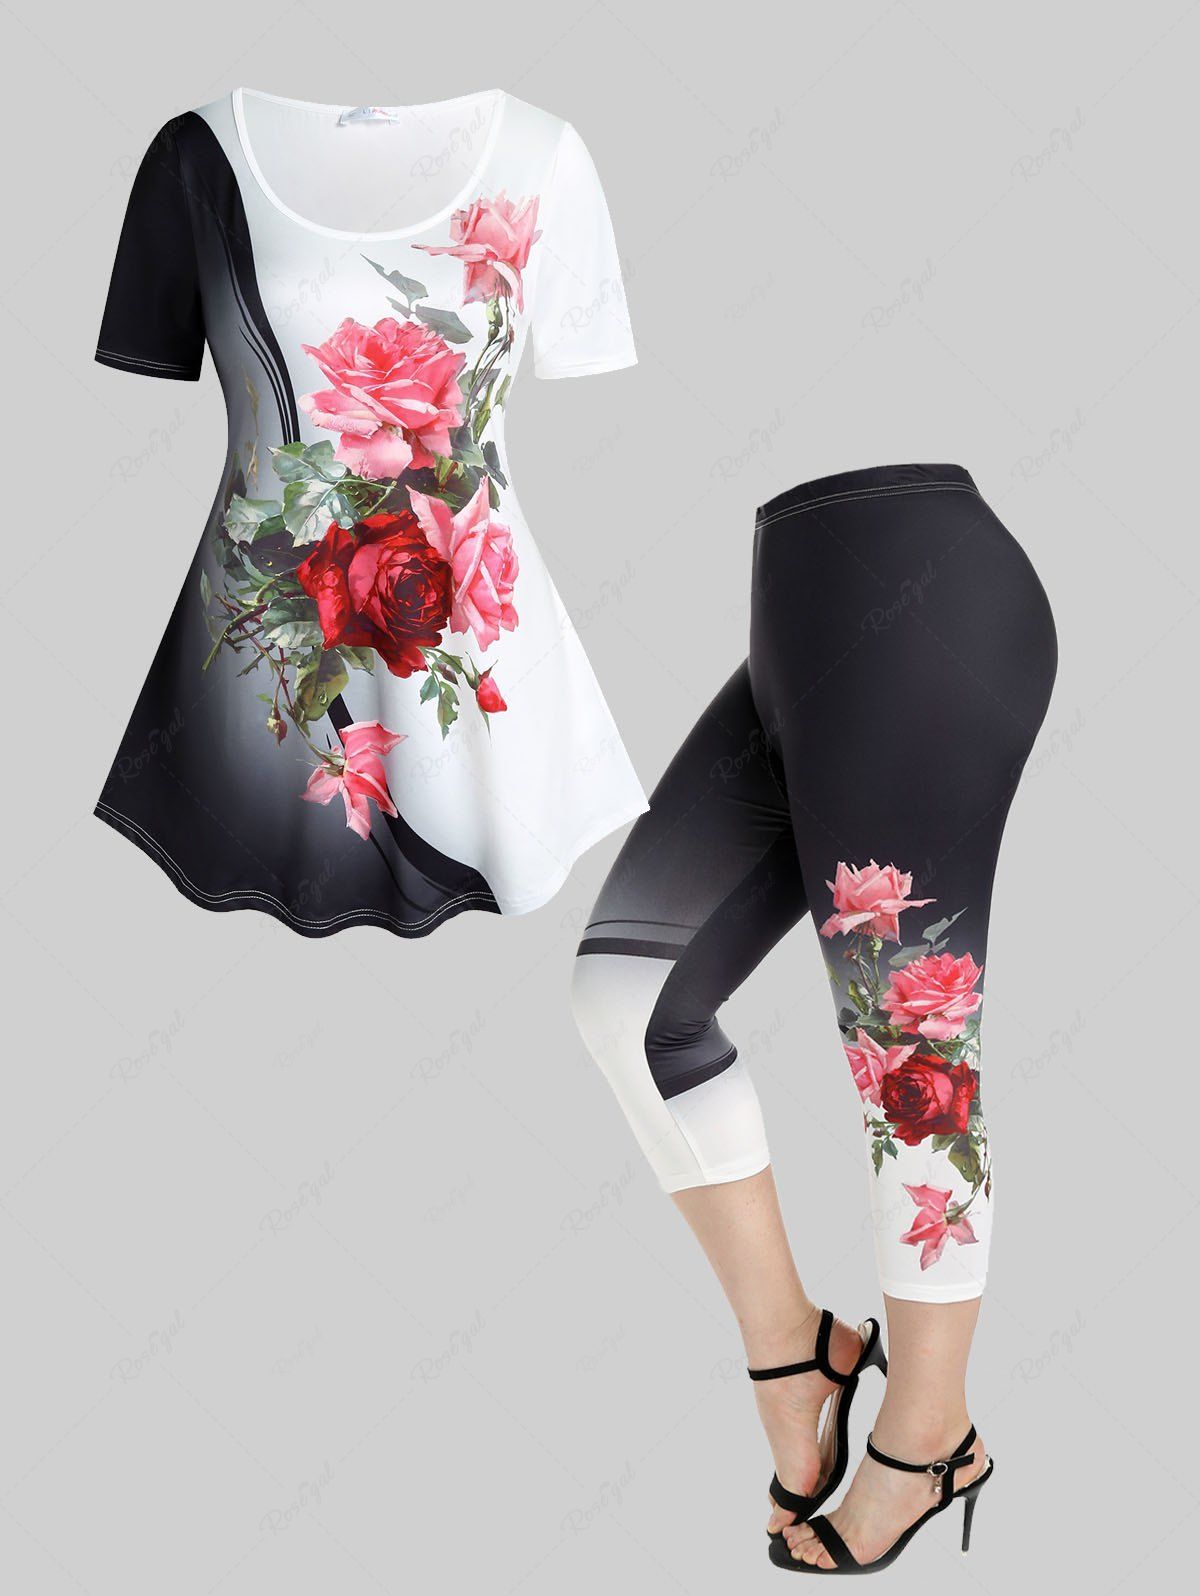 Buy Rose Print Colorblock T-shirt and High Waist Rose Print Colorblock Capri Leggings Plus Size Summer Outfit  